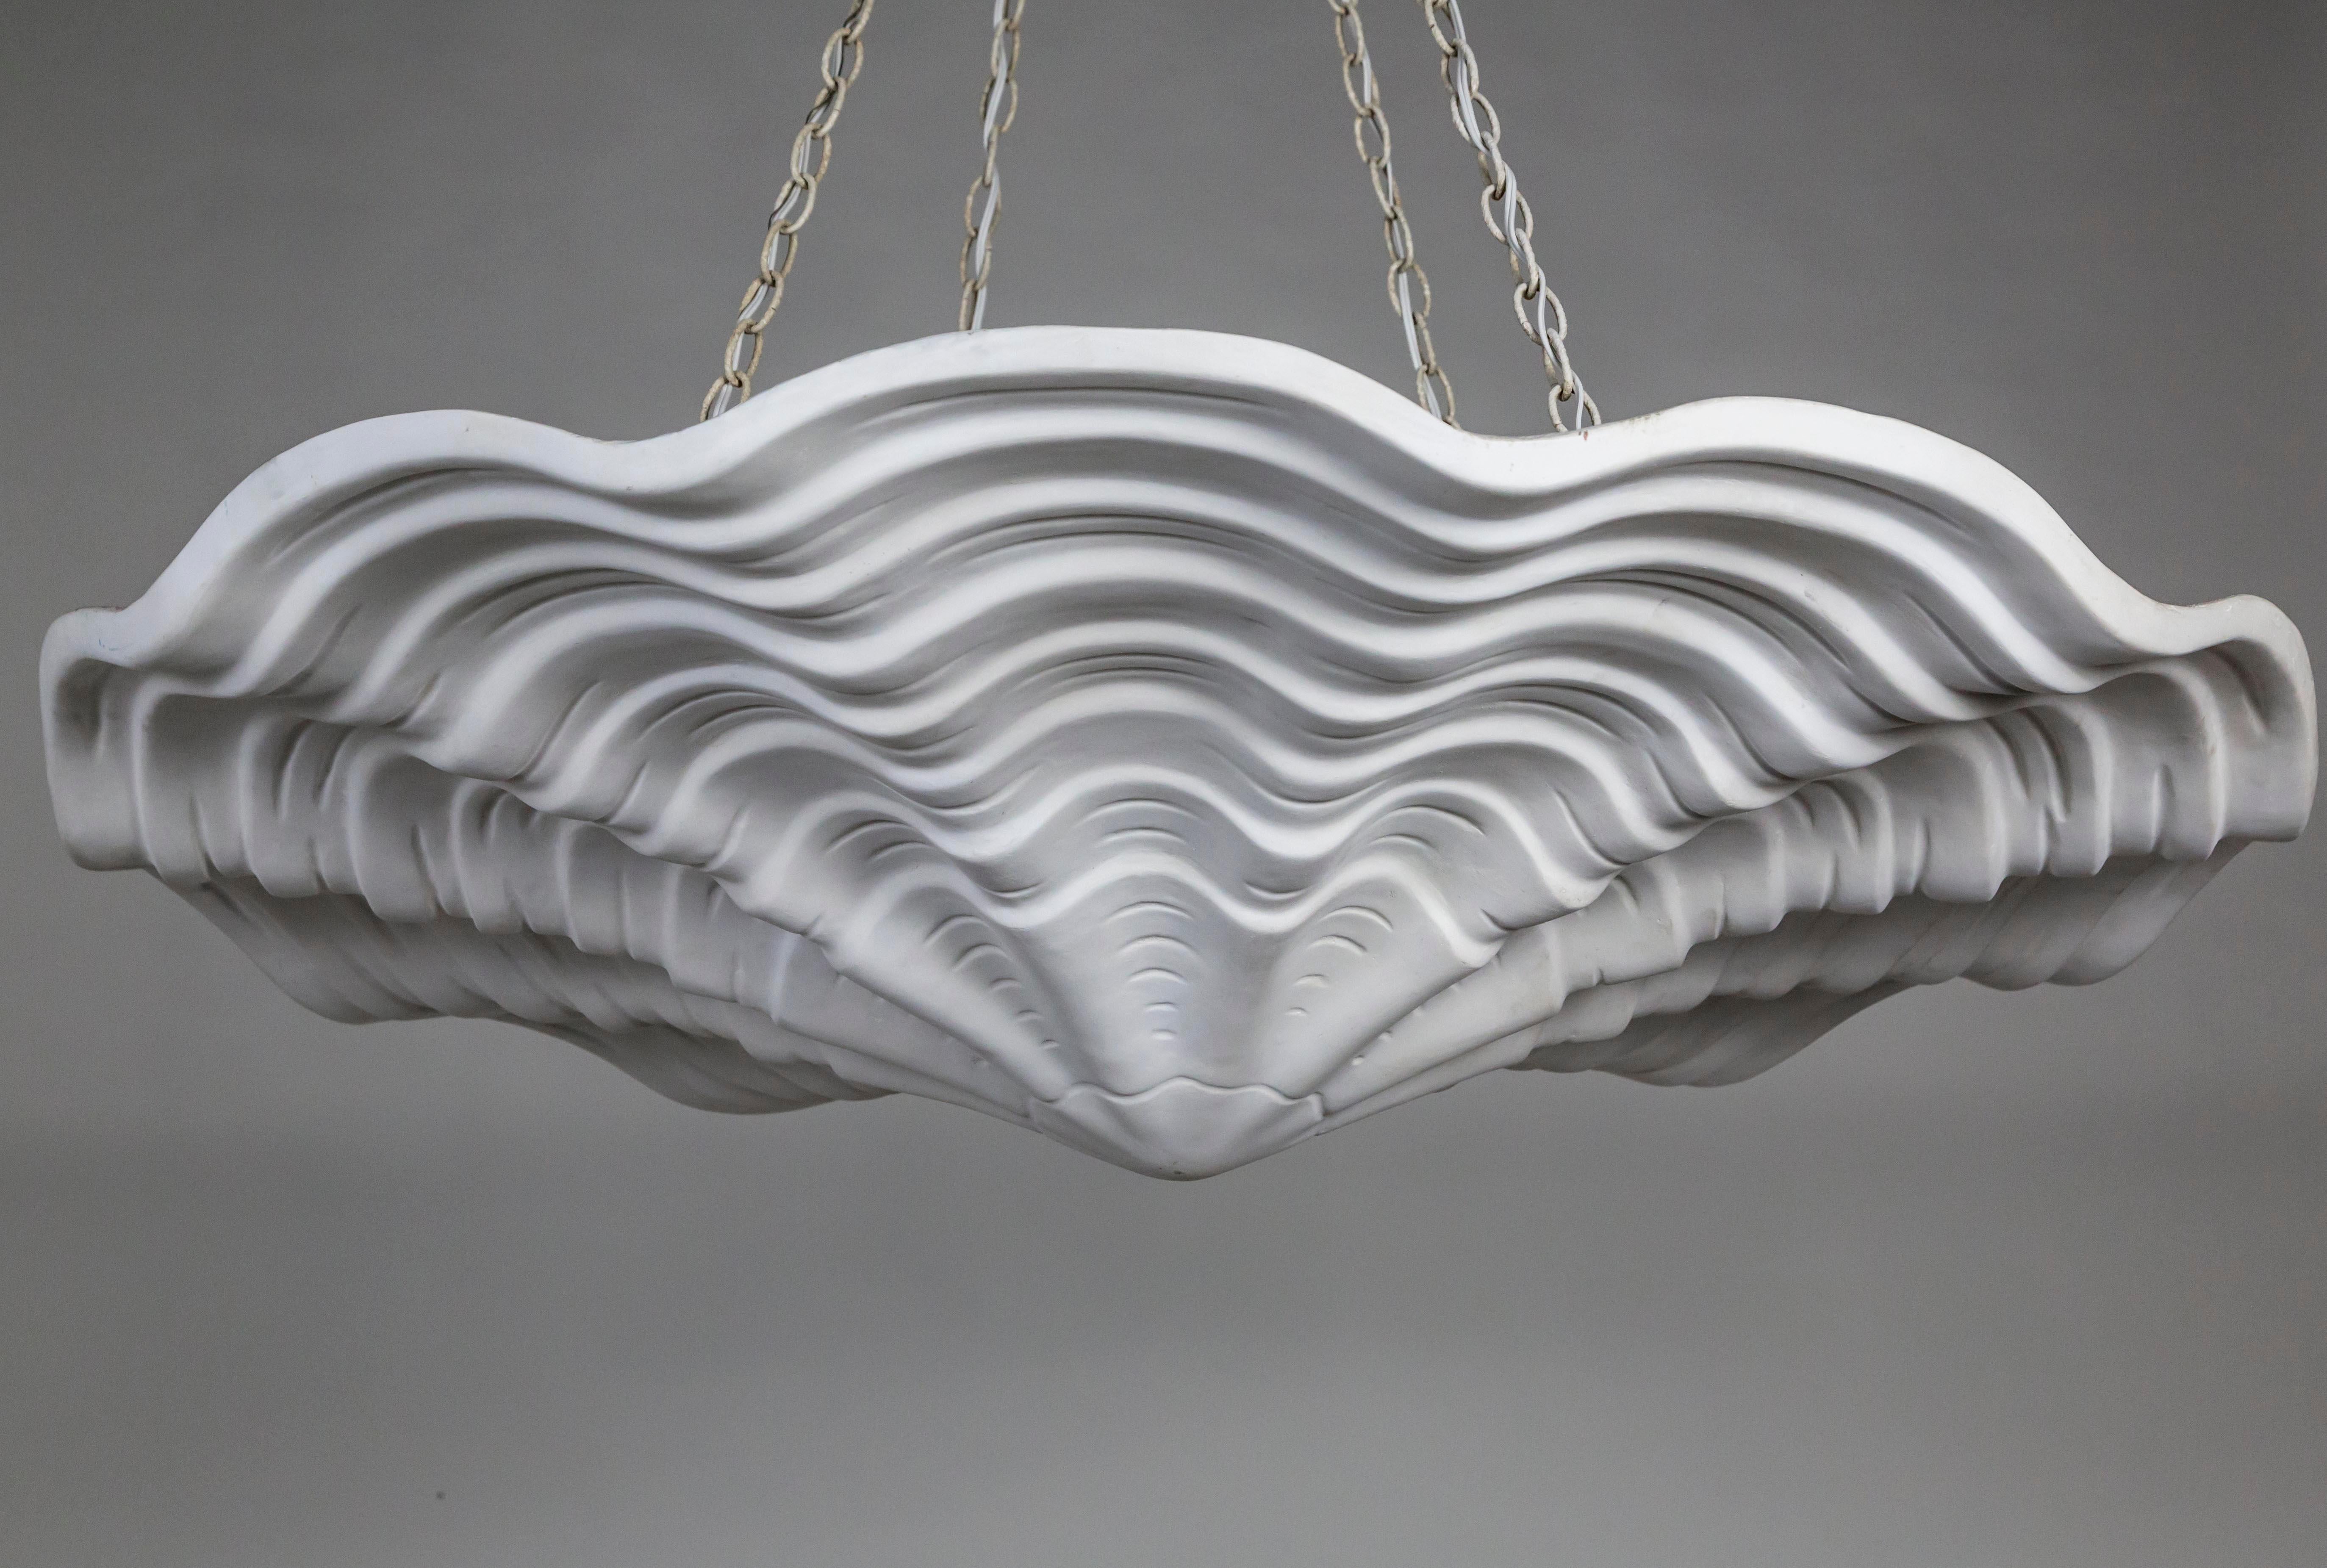 A plaster pendant in an undulating shell shape, with scalloped edges and imprinted lines accentuating the form. A newer take on Francis Elkins's 1940s plaster plafonnier. Hanging by four chains; with 4 medium base ceramic sockets. Contemporary; made